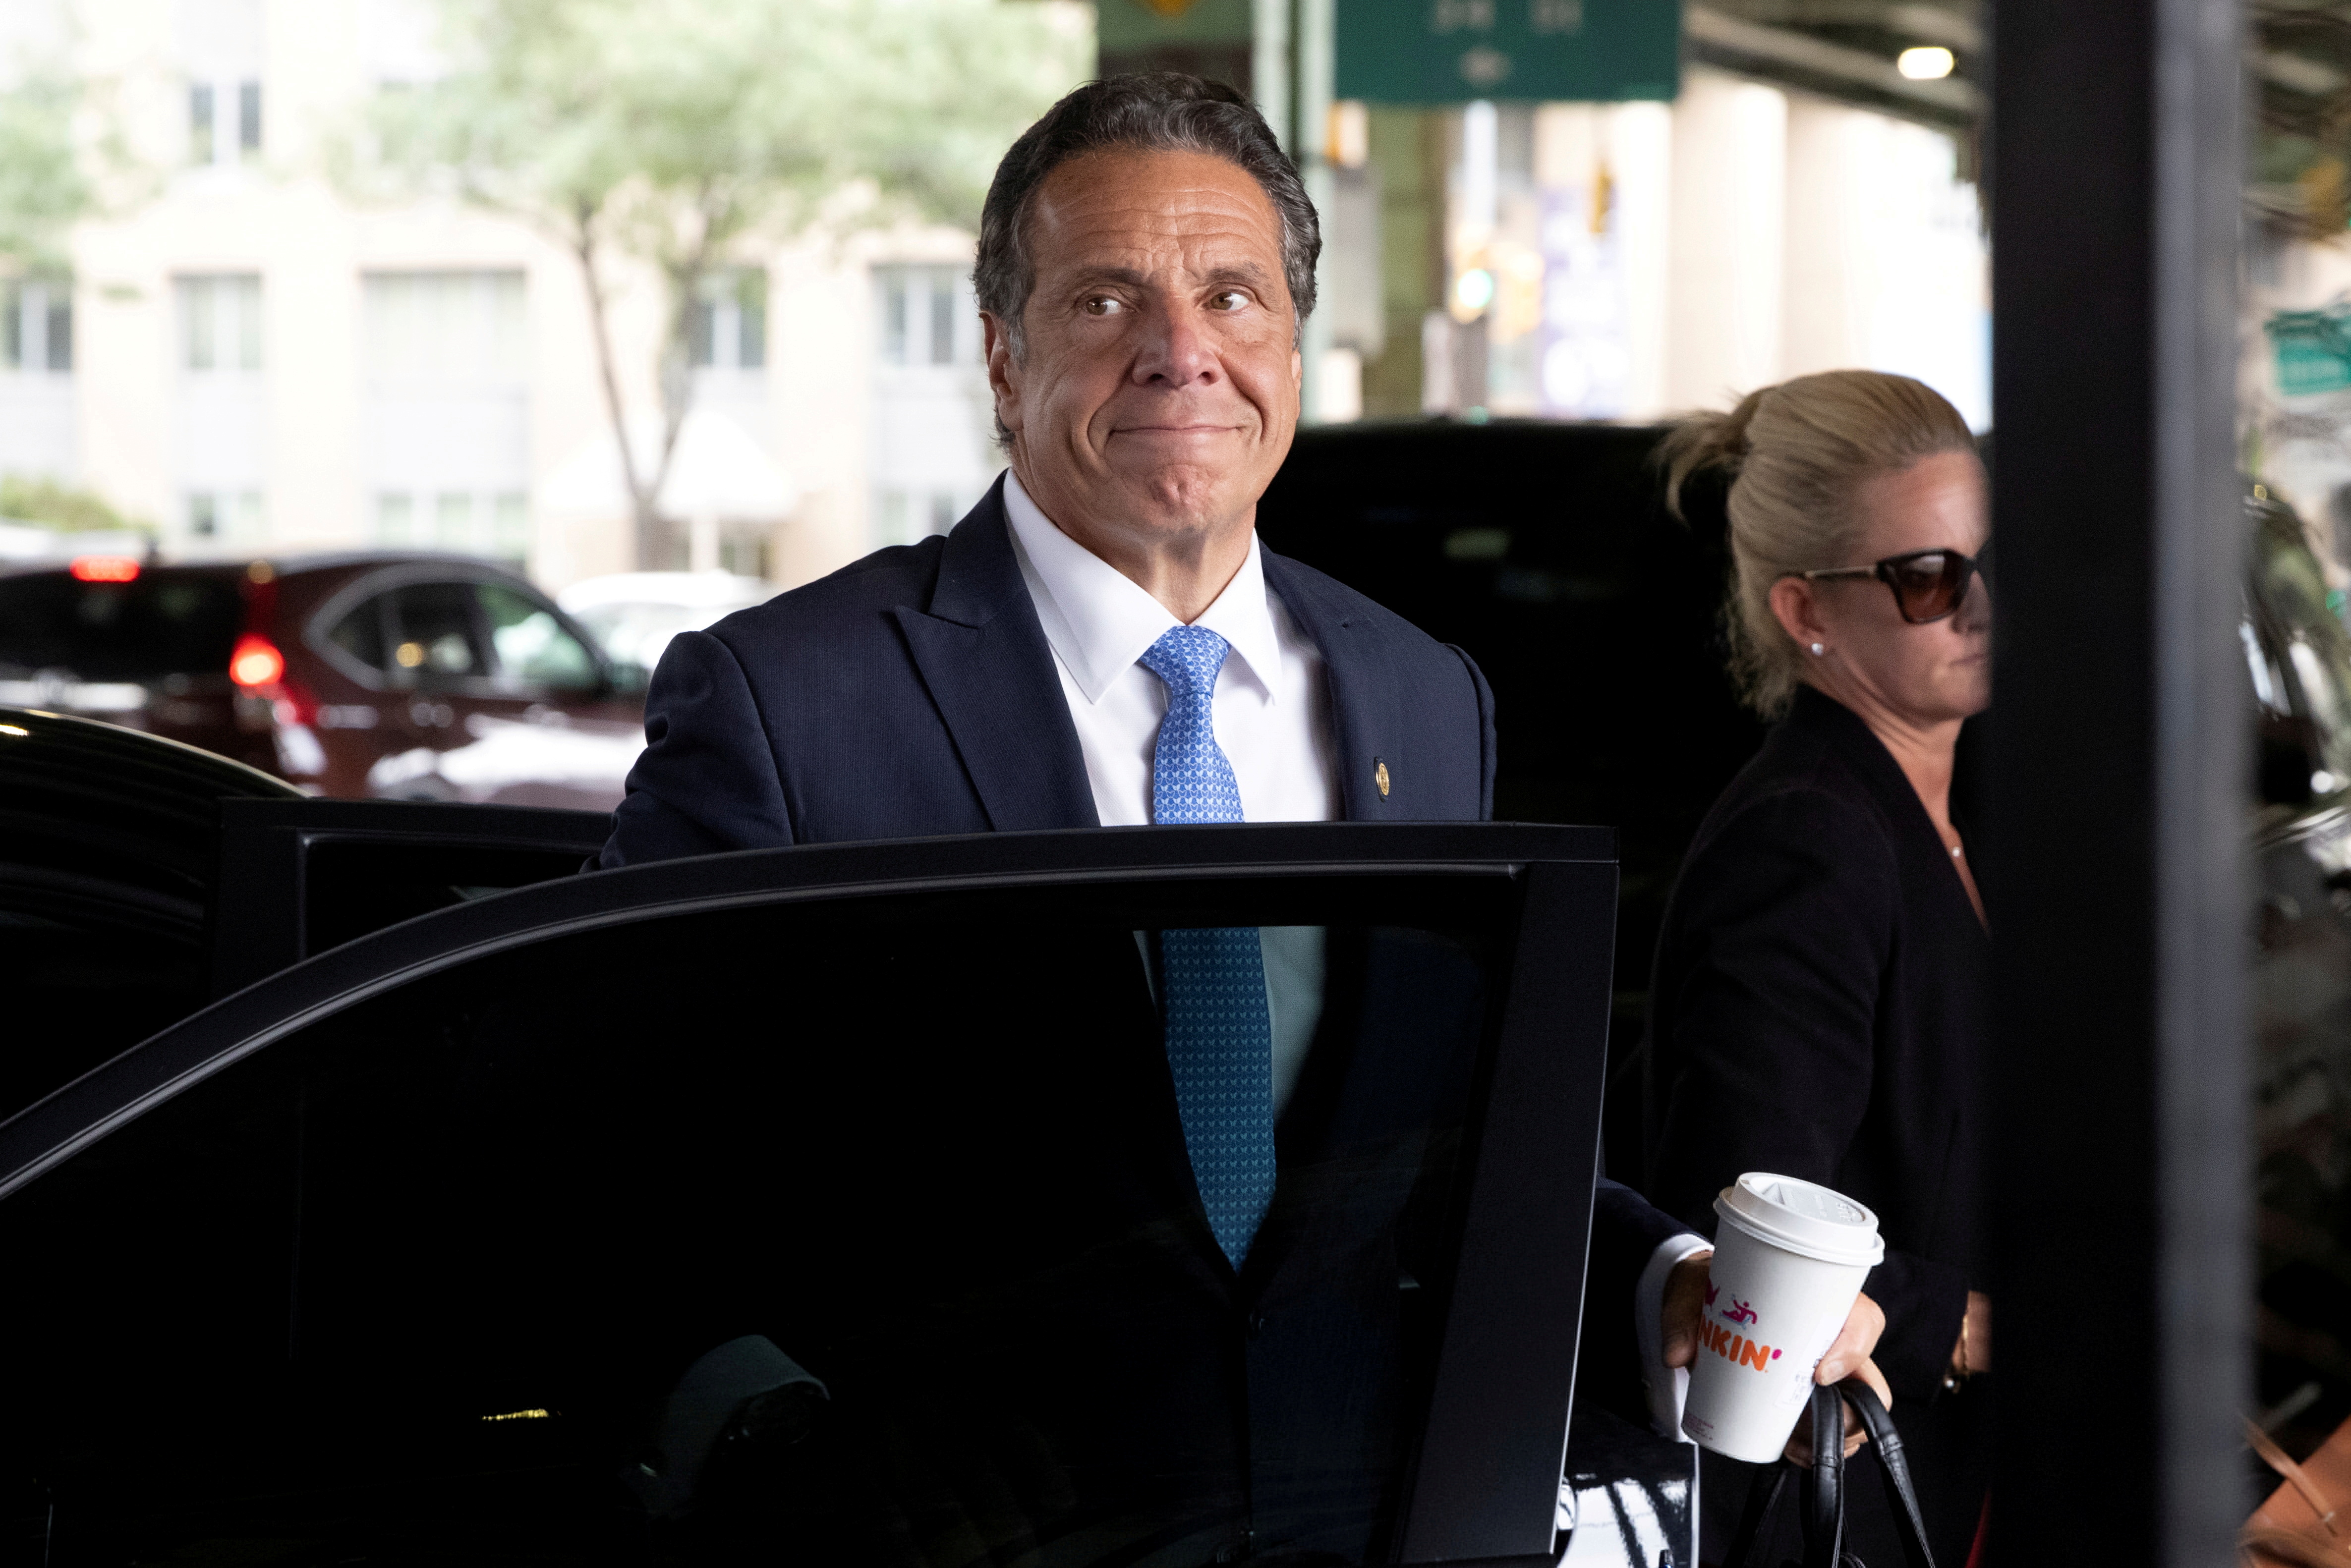 New York Governor Andrew Cuomo arrives to depart in his helicopter after announcing his resignation in Manhattan, New York City, U.S., August 10, 2021. REUTERS/Caitlin Ochs/File Photo